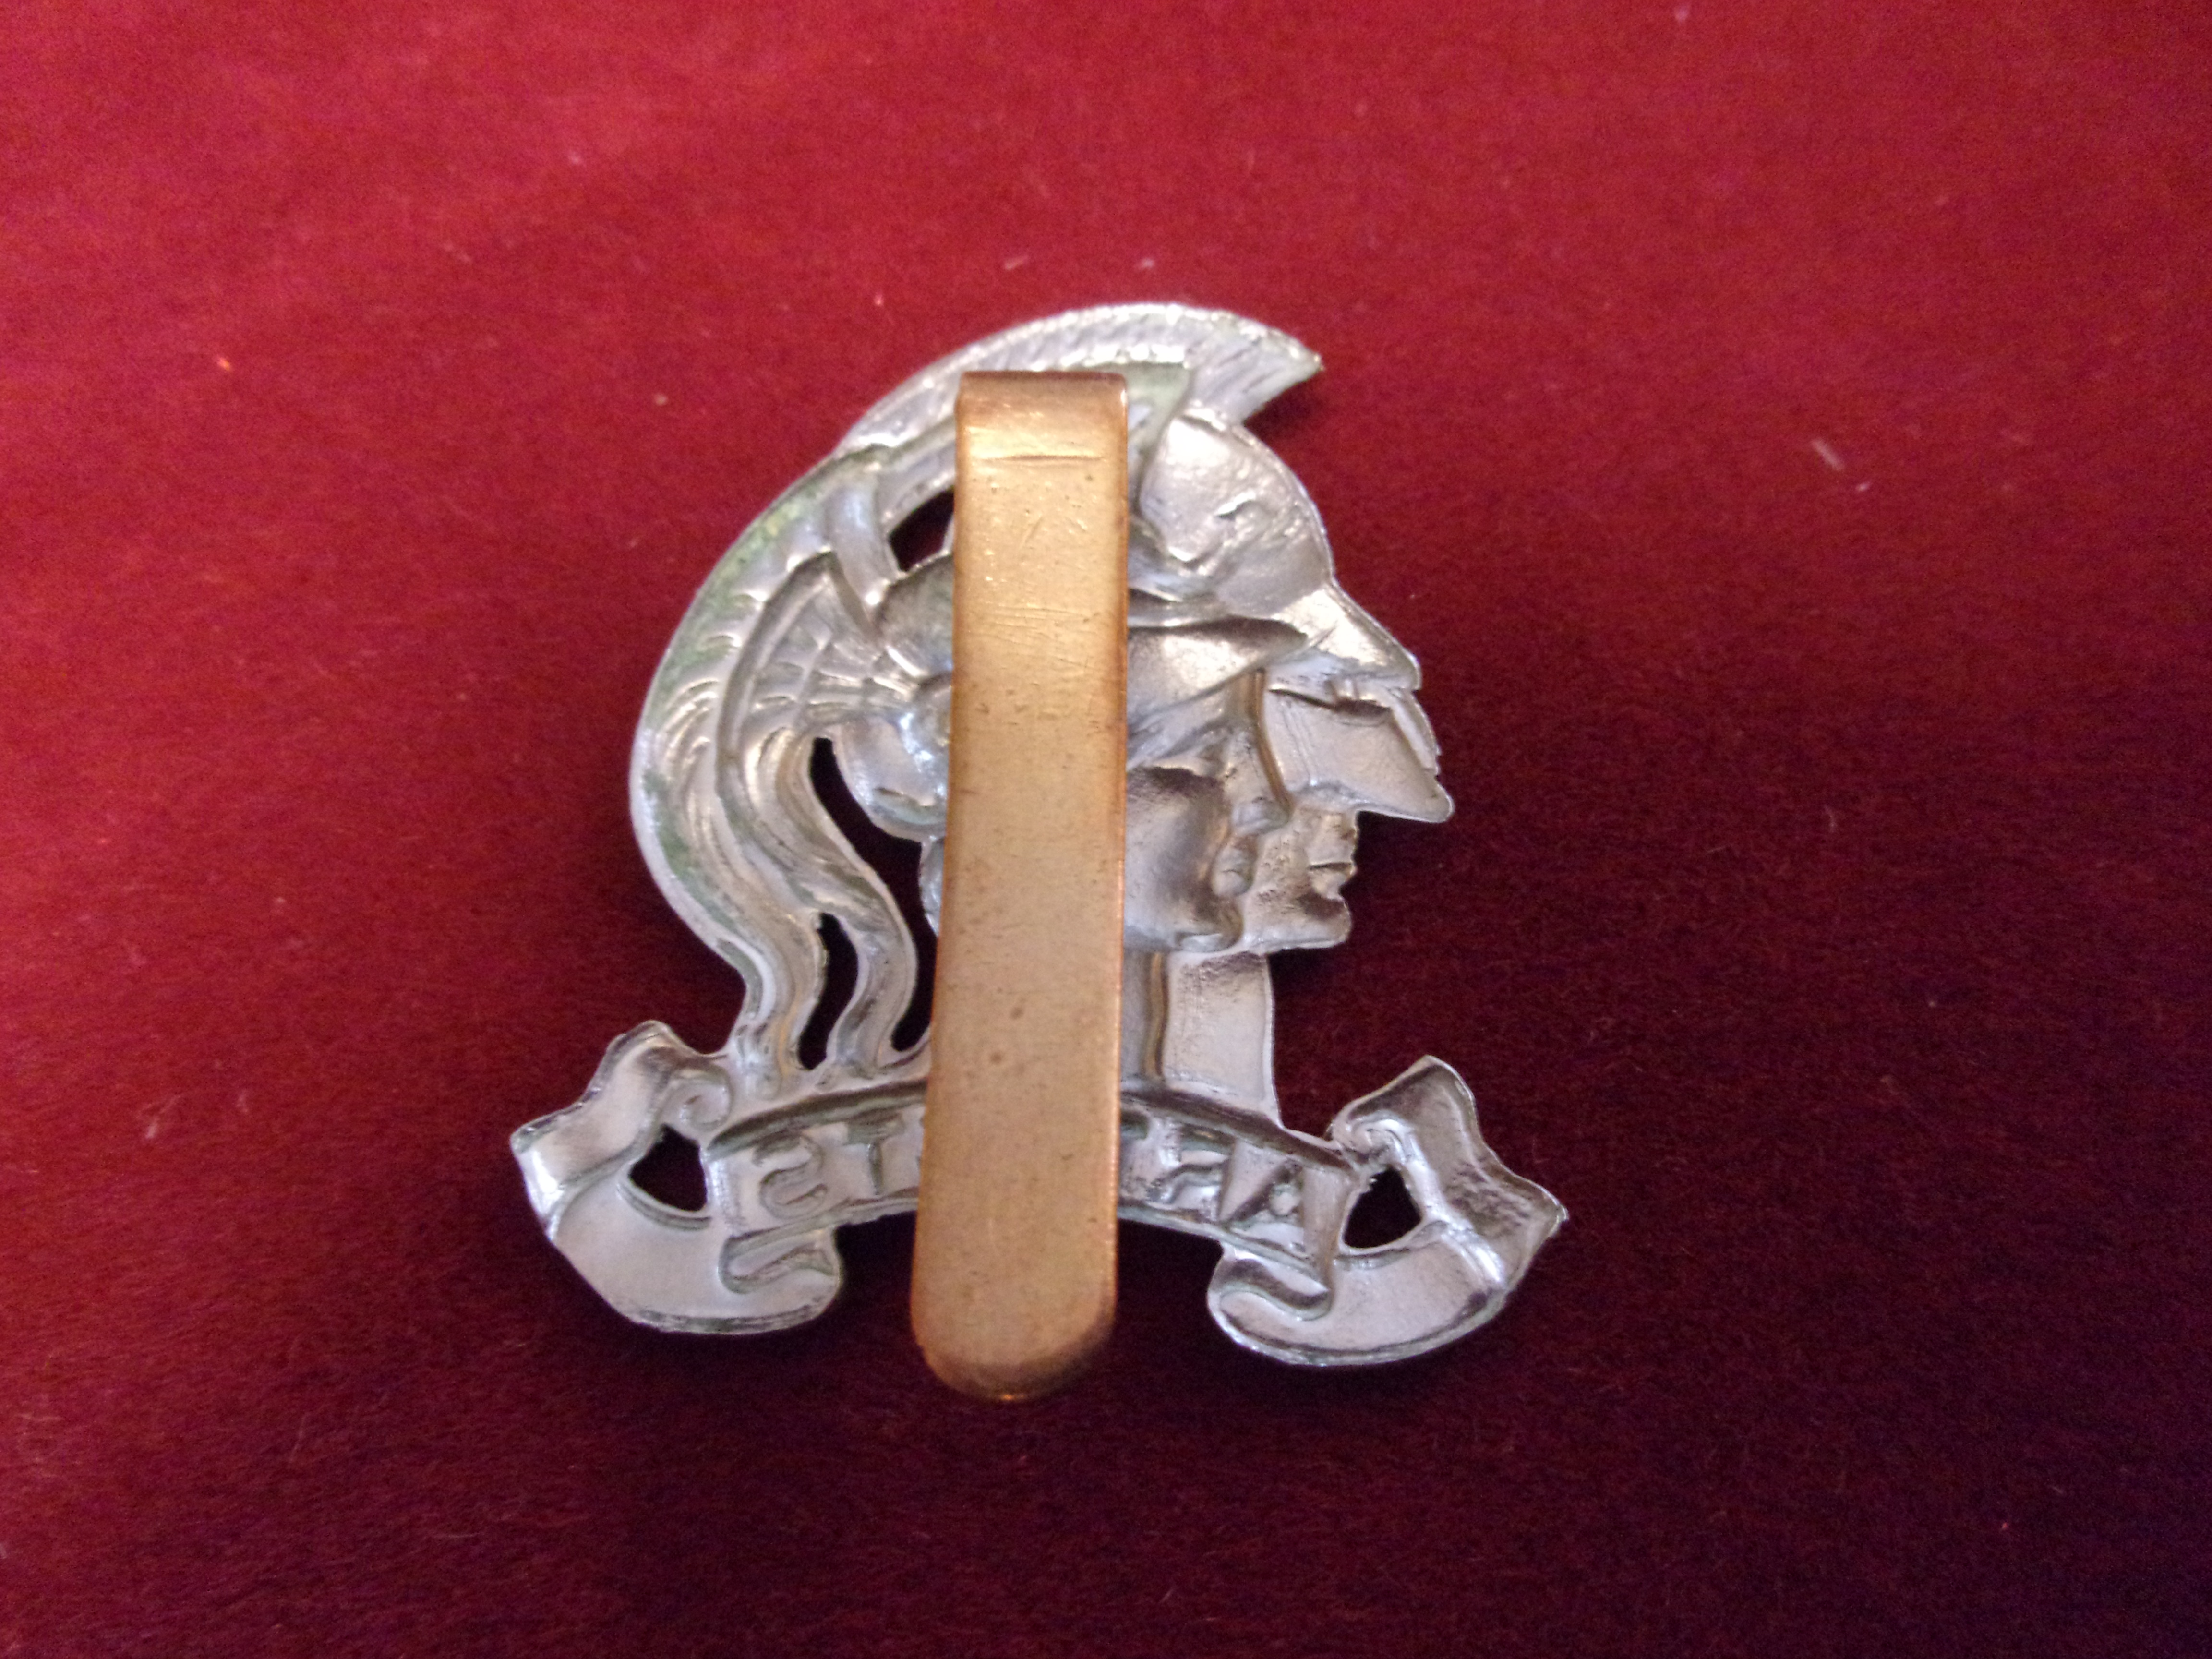 21st (County of London) Artists Rifles WWI Other Ranks Cap Badge (White-metal), Slider. - Image 2 of 2